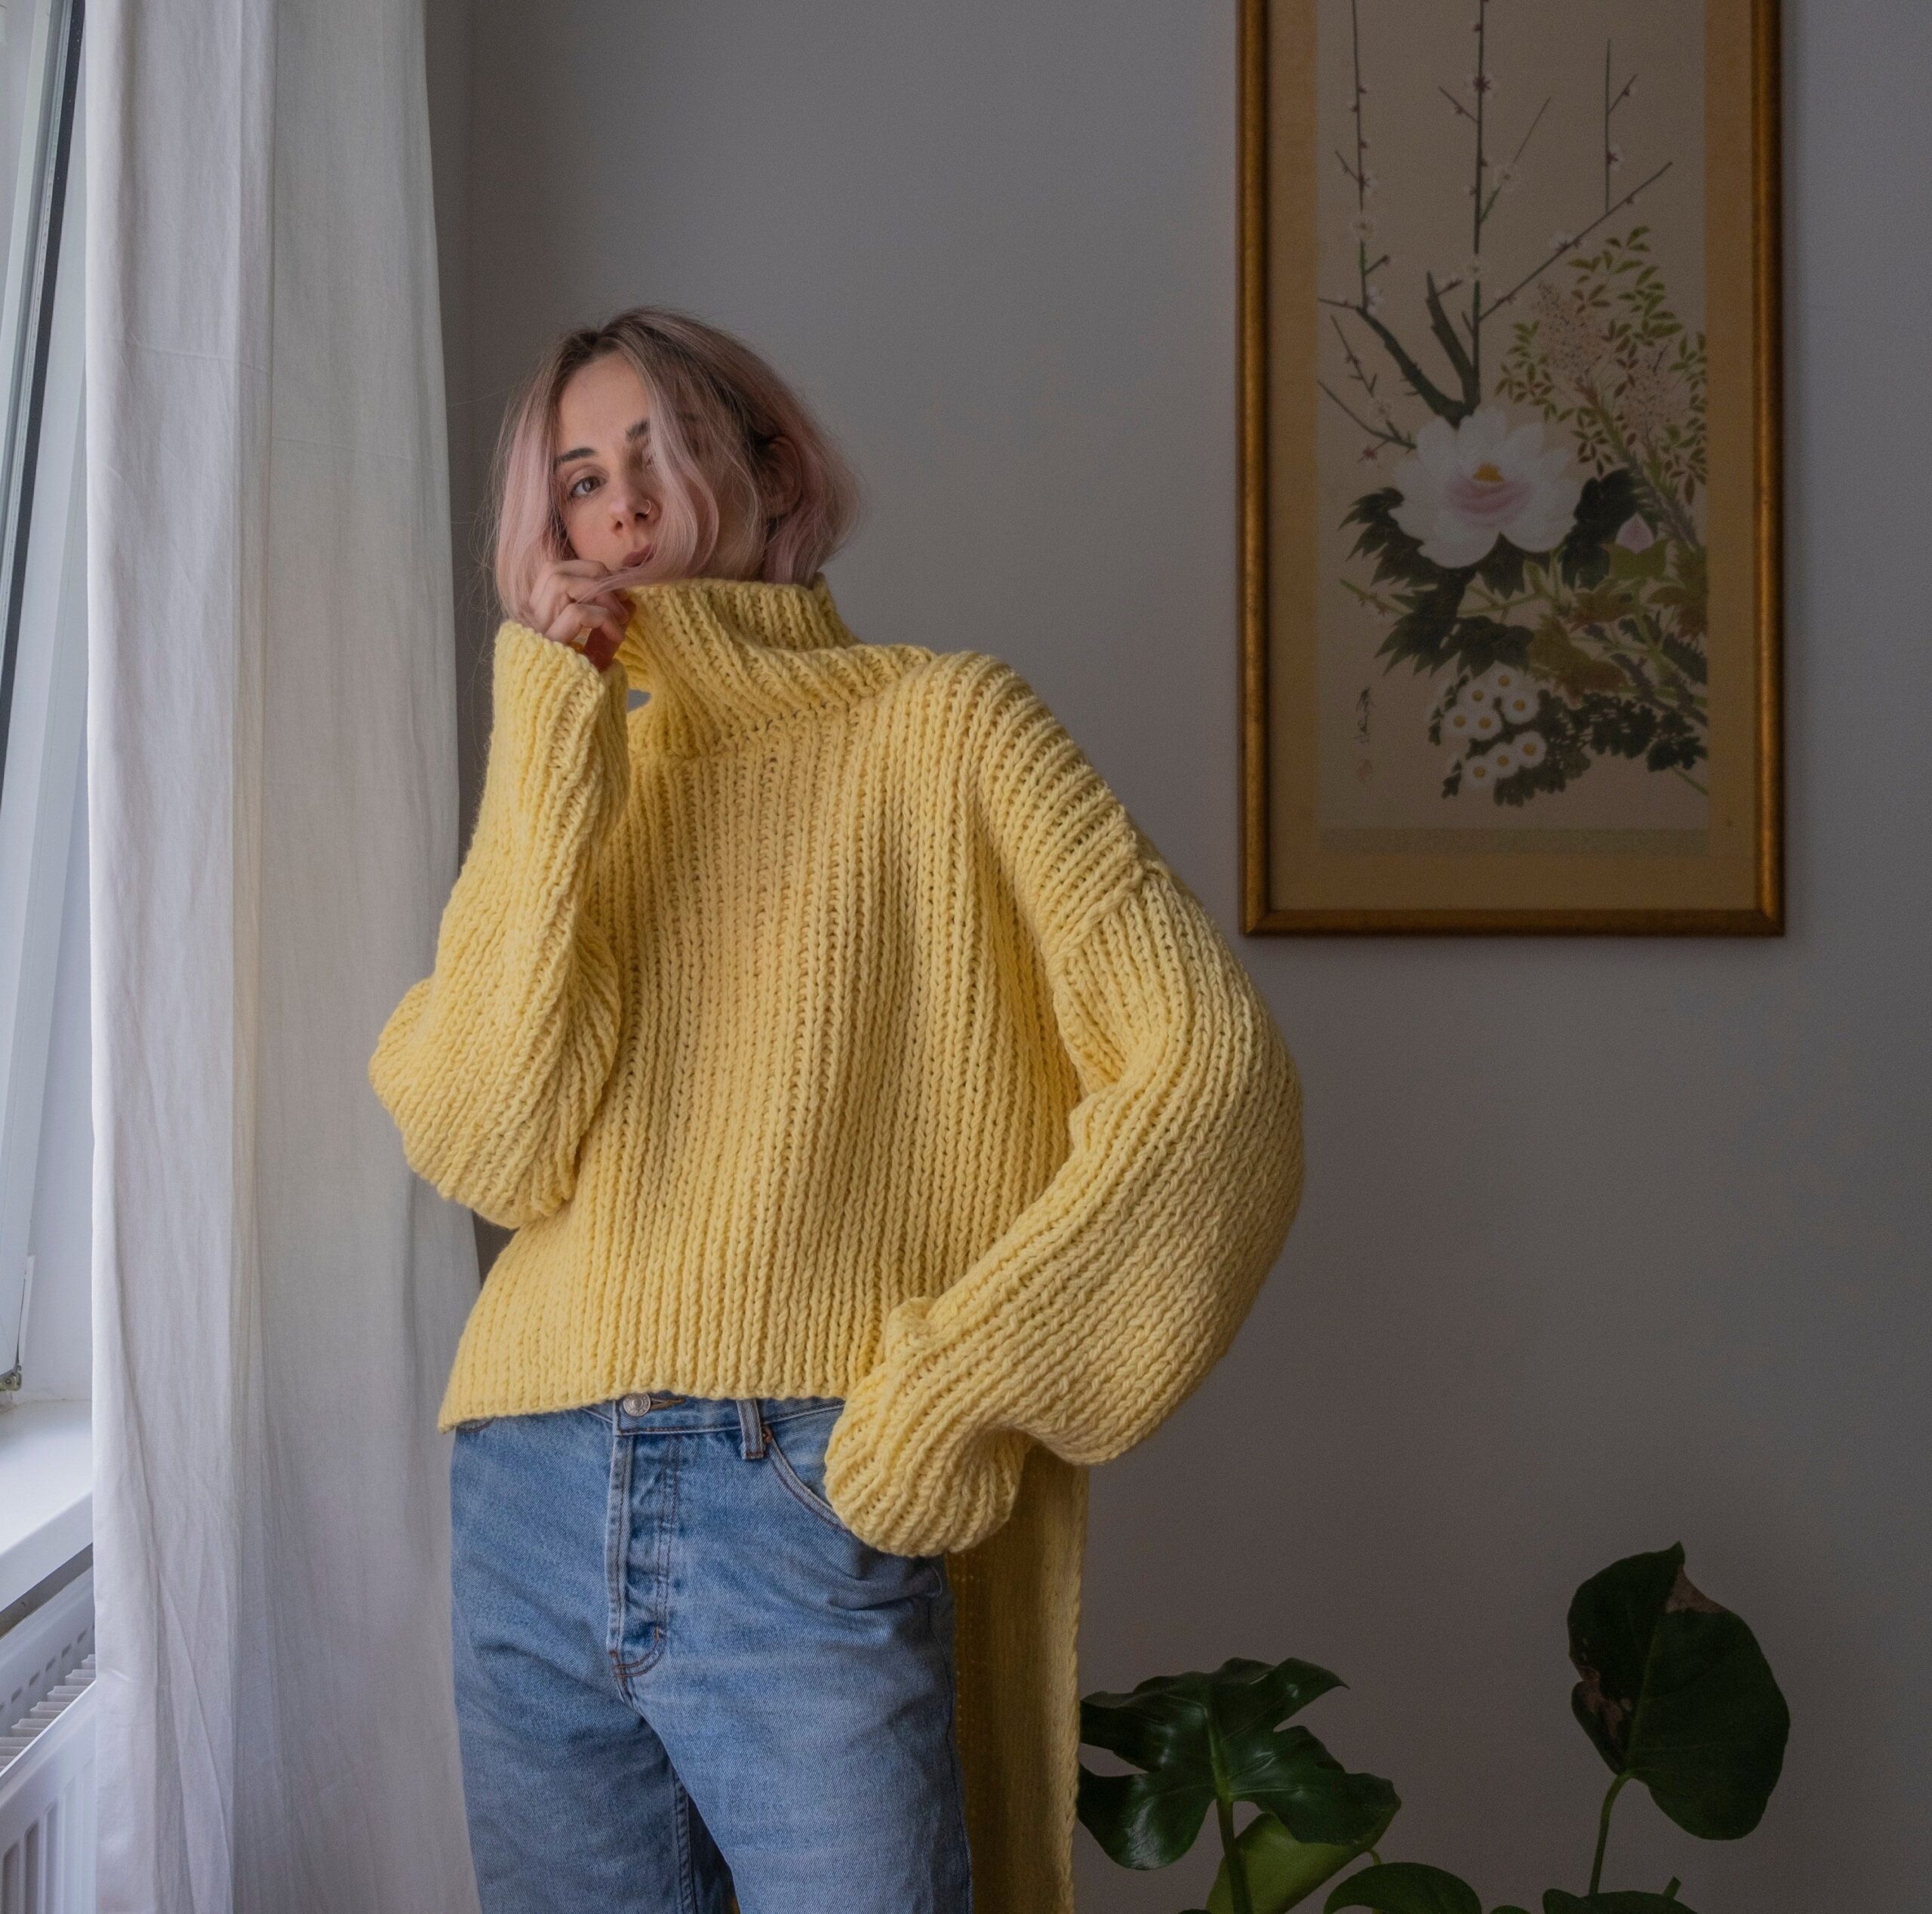 How to Wear Mustard Yellow Sweater: Top 15 Cheerful Outfit Ideas for ...